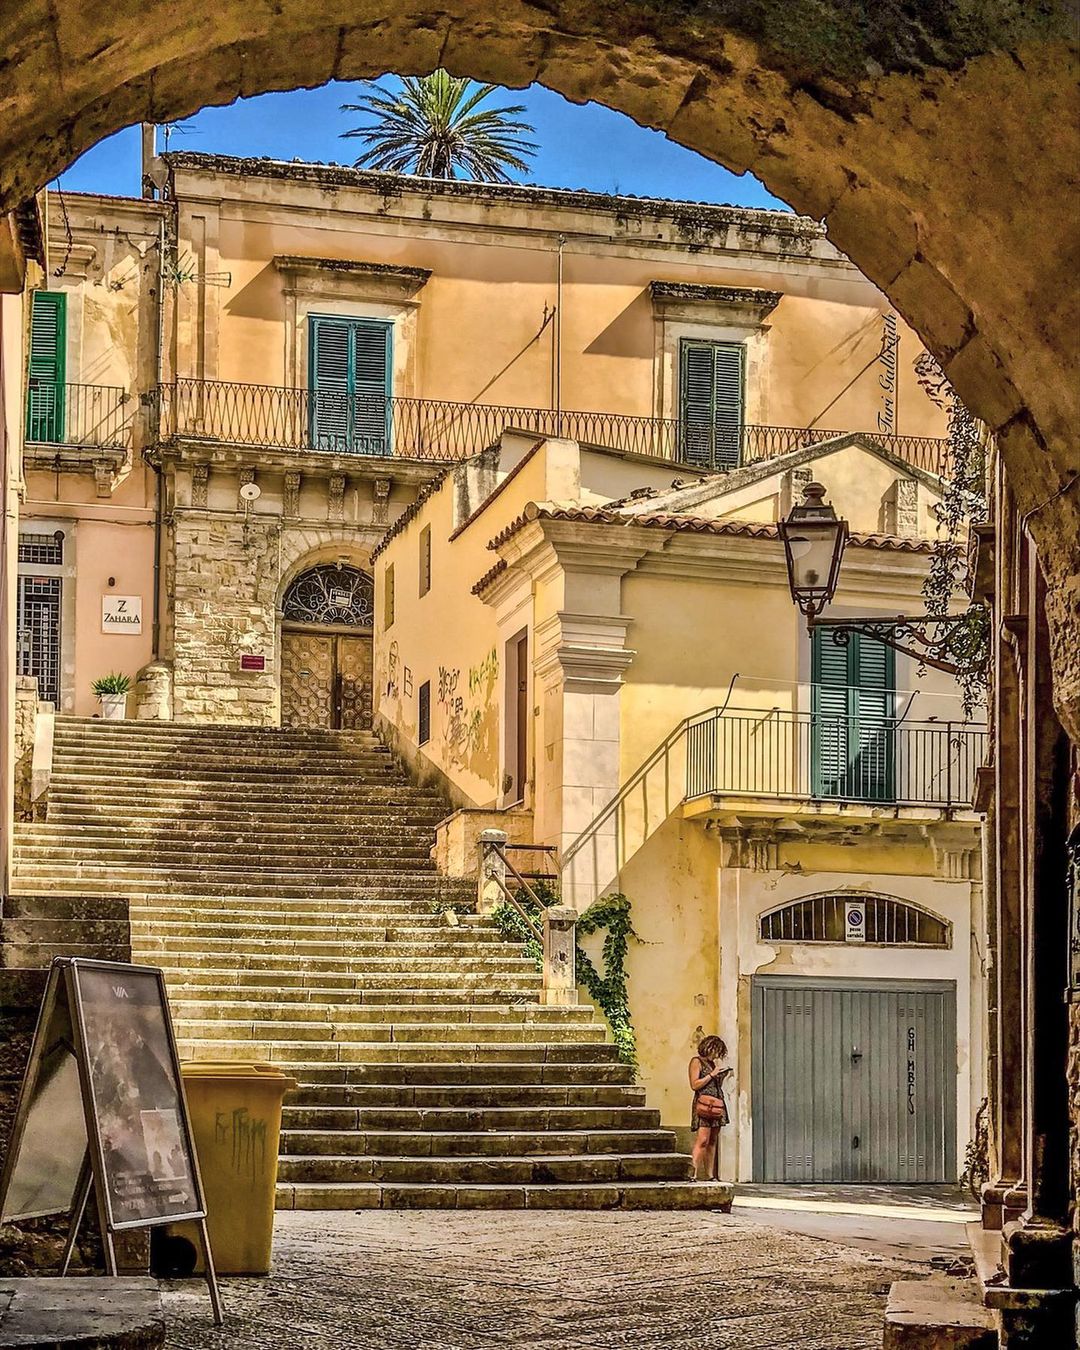 The historical center and the alleys of Modica